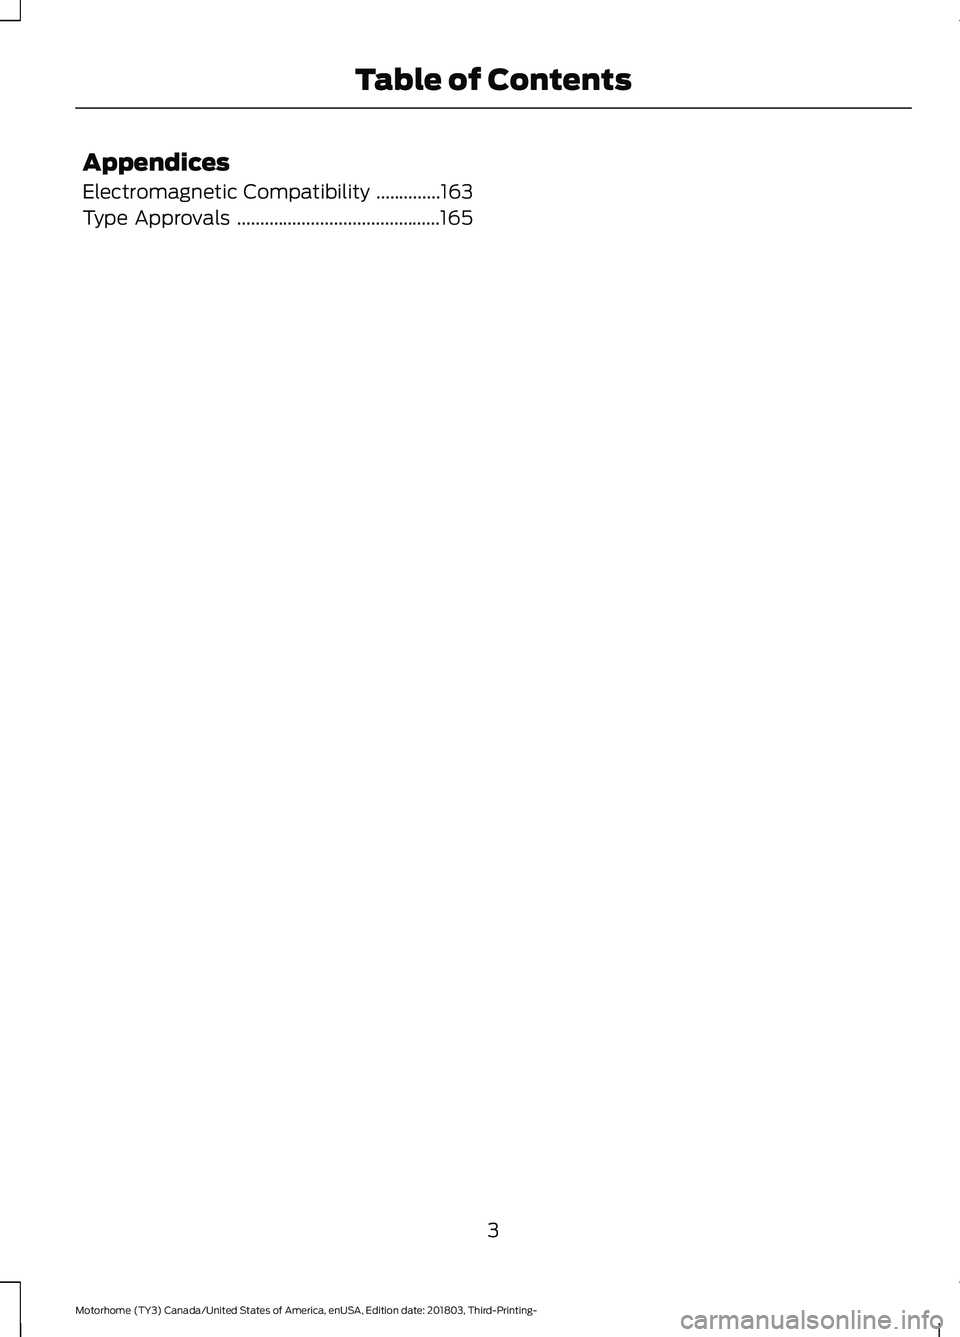 FORD F-59 2019  Owners Manual Appendices
Electromagnetic Compatibility..............163
Type Approvals............................................165
3
Motorhome (TY3) Canada/United States of America, enUSA, Edition date: 201803, 